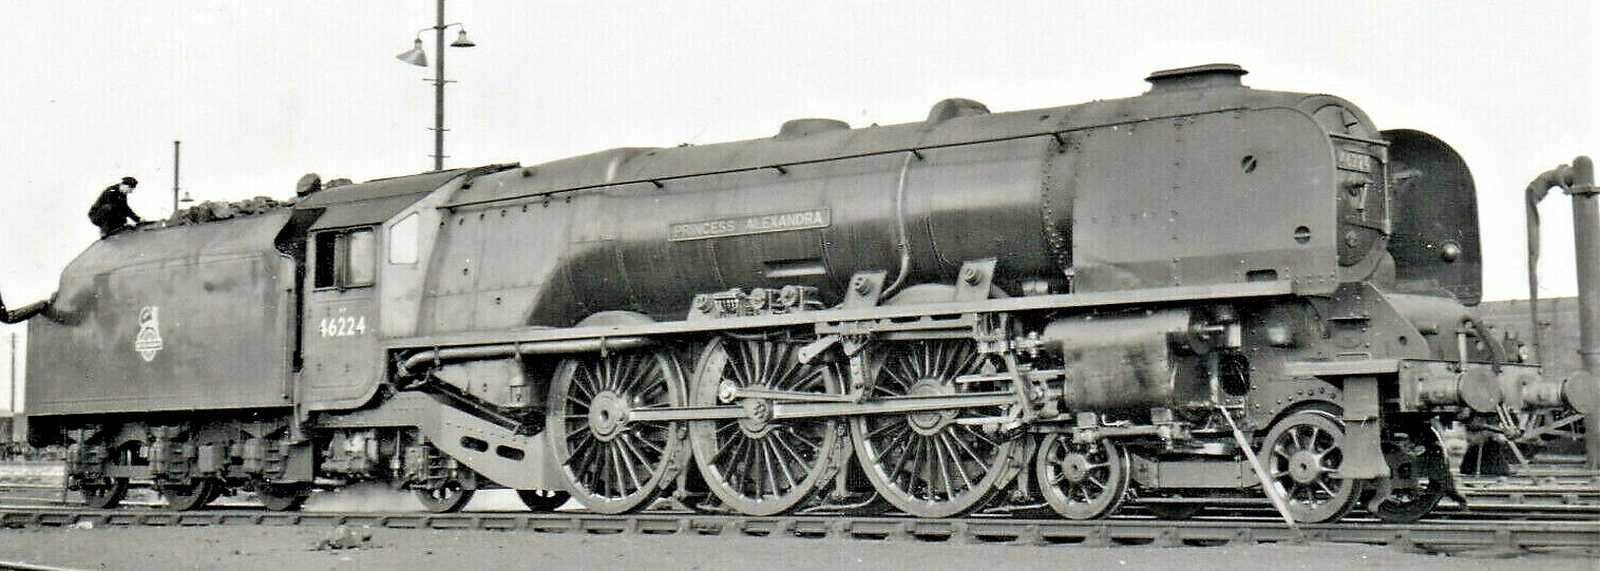 No. 46254 City of “Stoke-on-Trent” in June 1964 at Hartford Junction